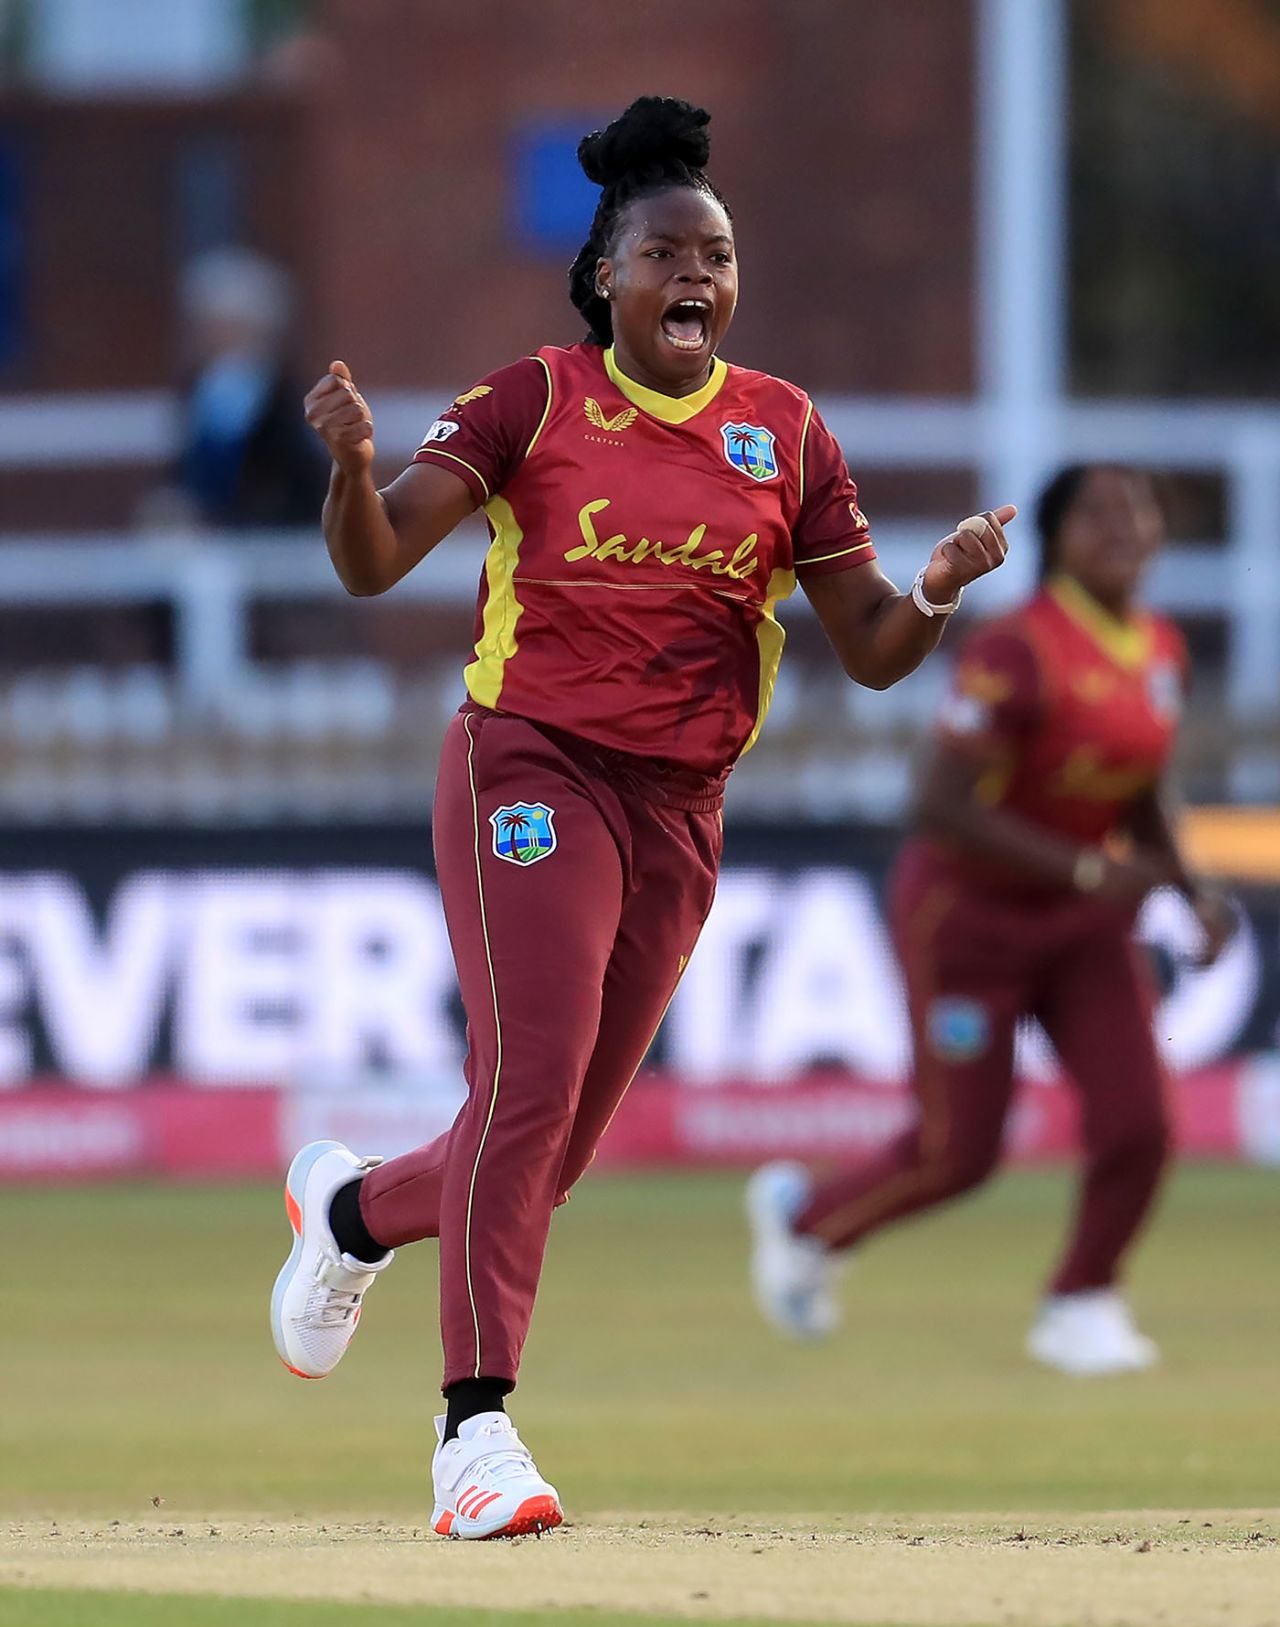 Aaliyah Alleyne struck in the Powerplay, England v West Indies, 4th T20I, Derby, September 28, 2020